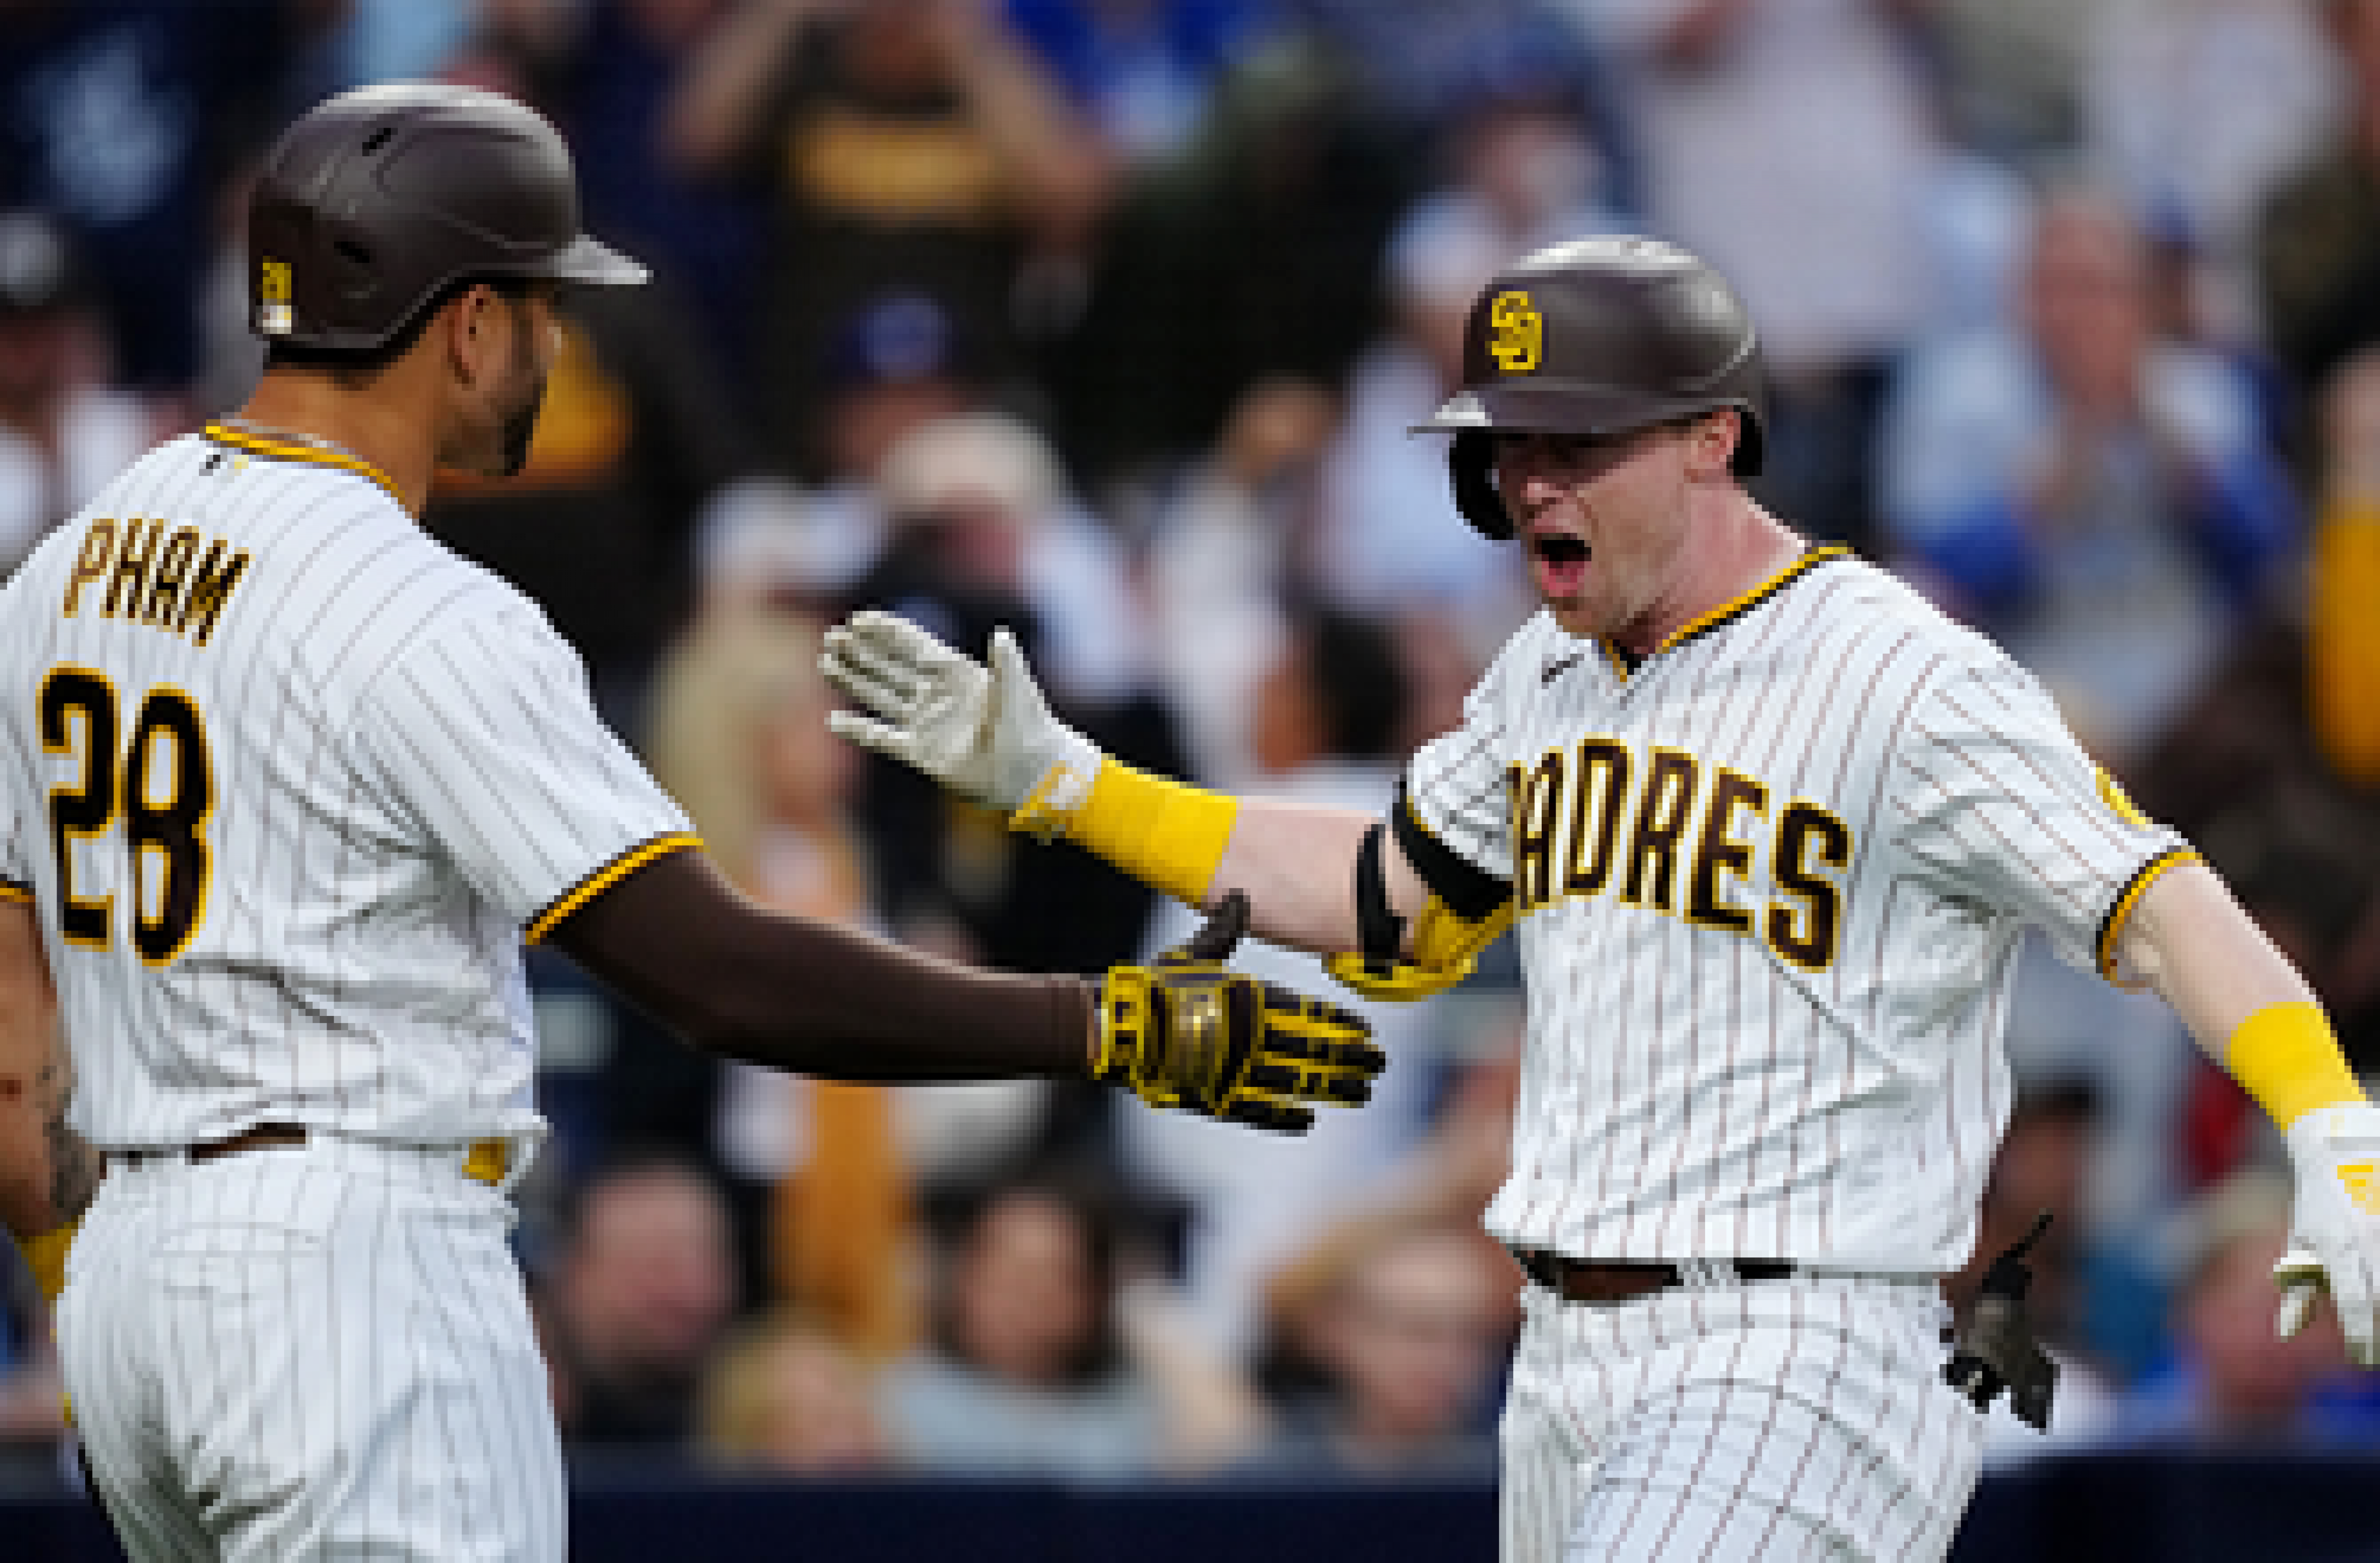 Jake Cronenworth stays hot with another two-run homer, Padres hold on for 3-2 win over Dodgers